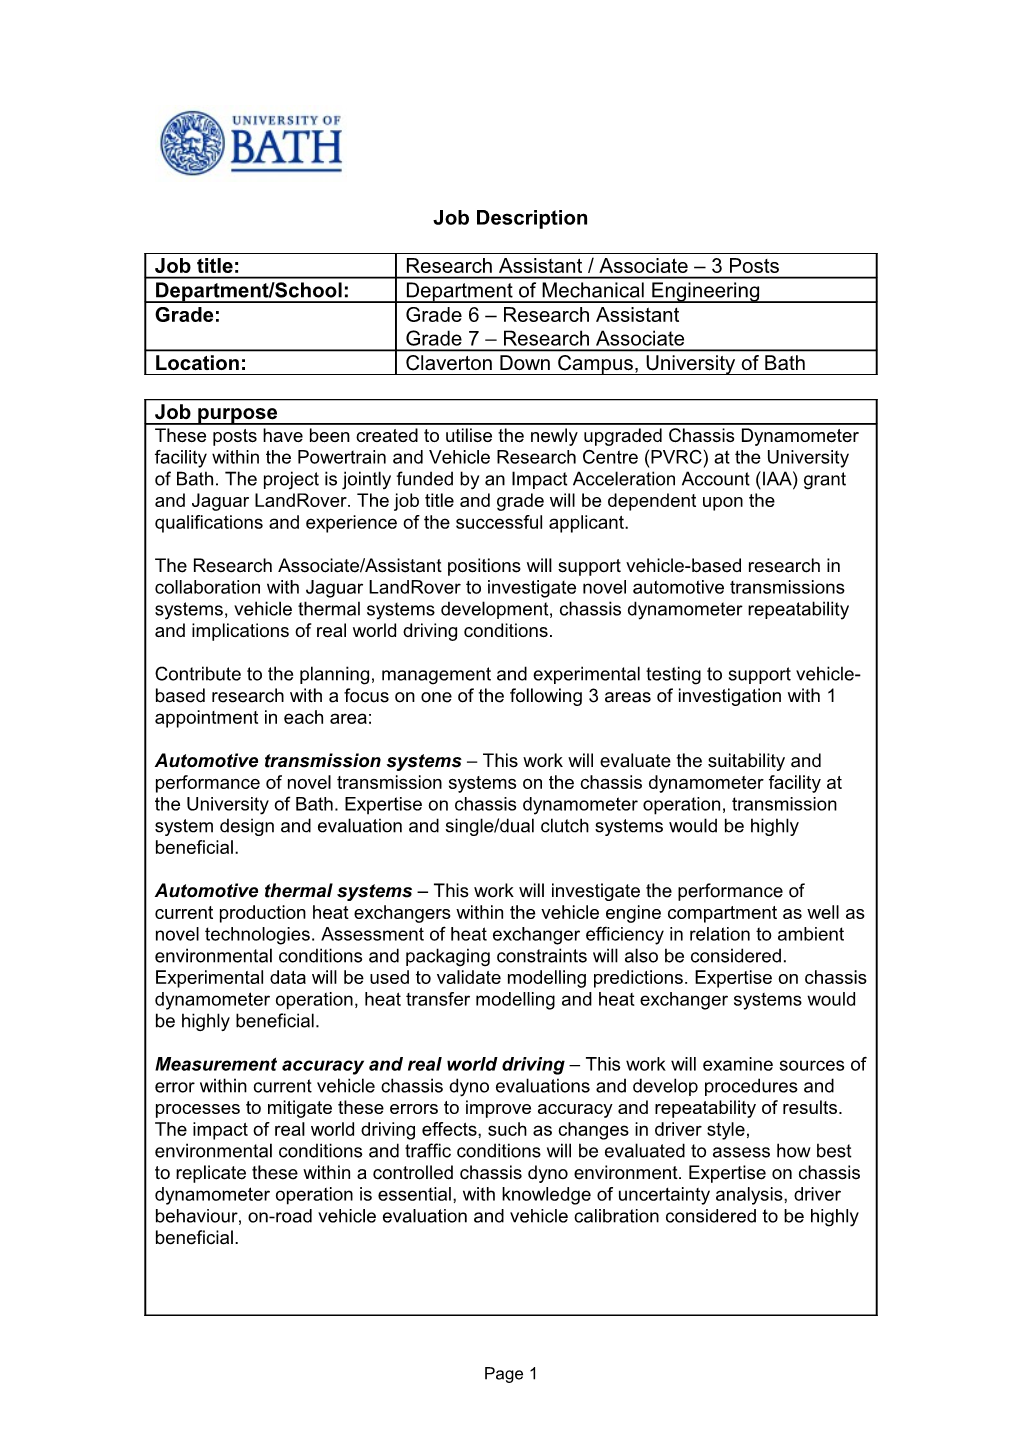 Person Specification Research Assistant (Grade 6)